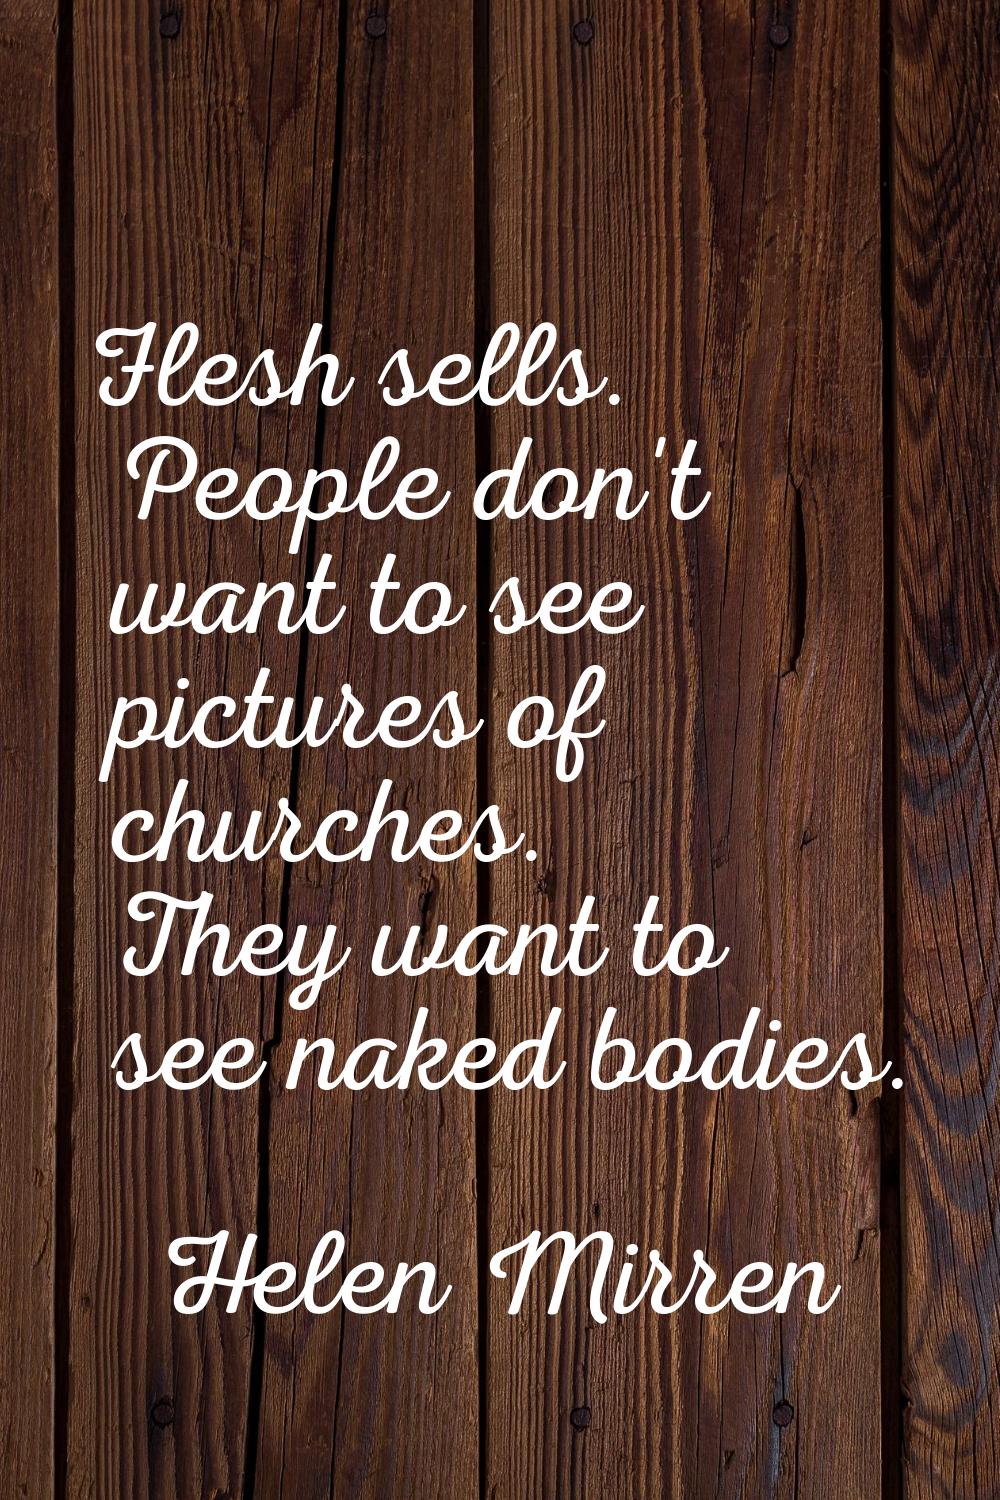 Flesh sells. People don't want to see pictures of churches. They want to see naked bodies.